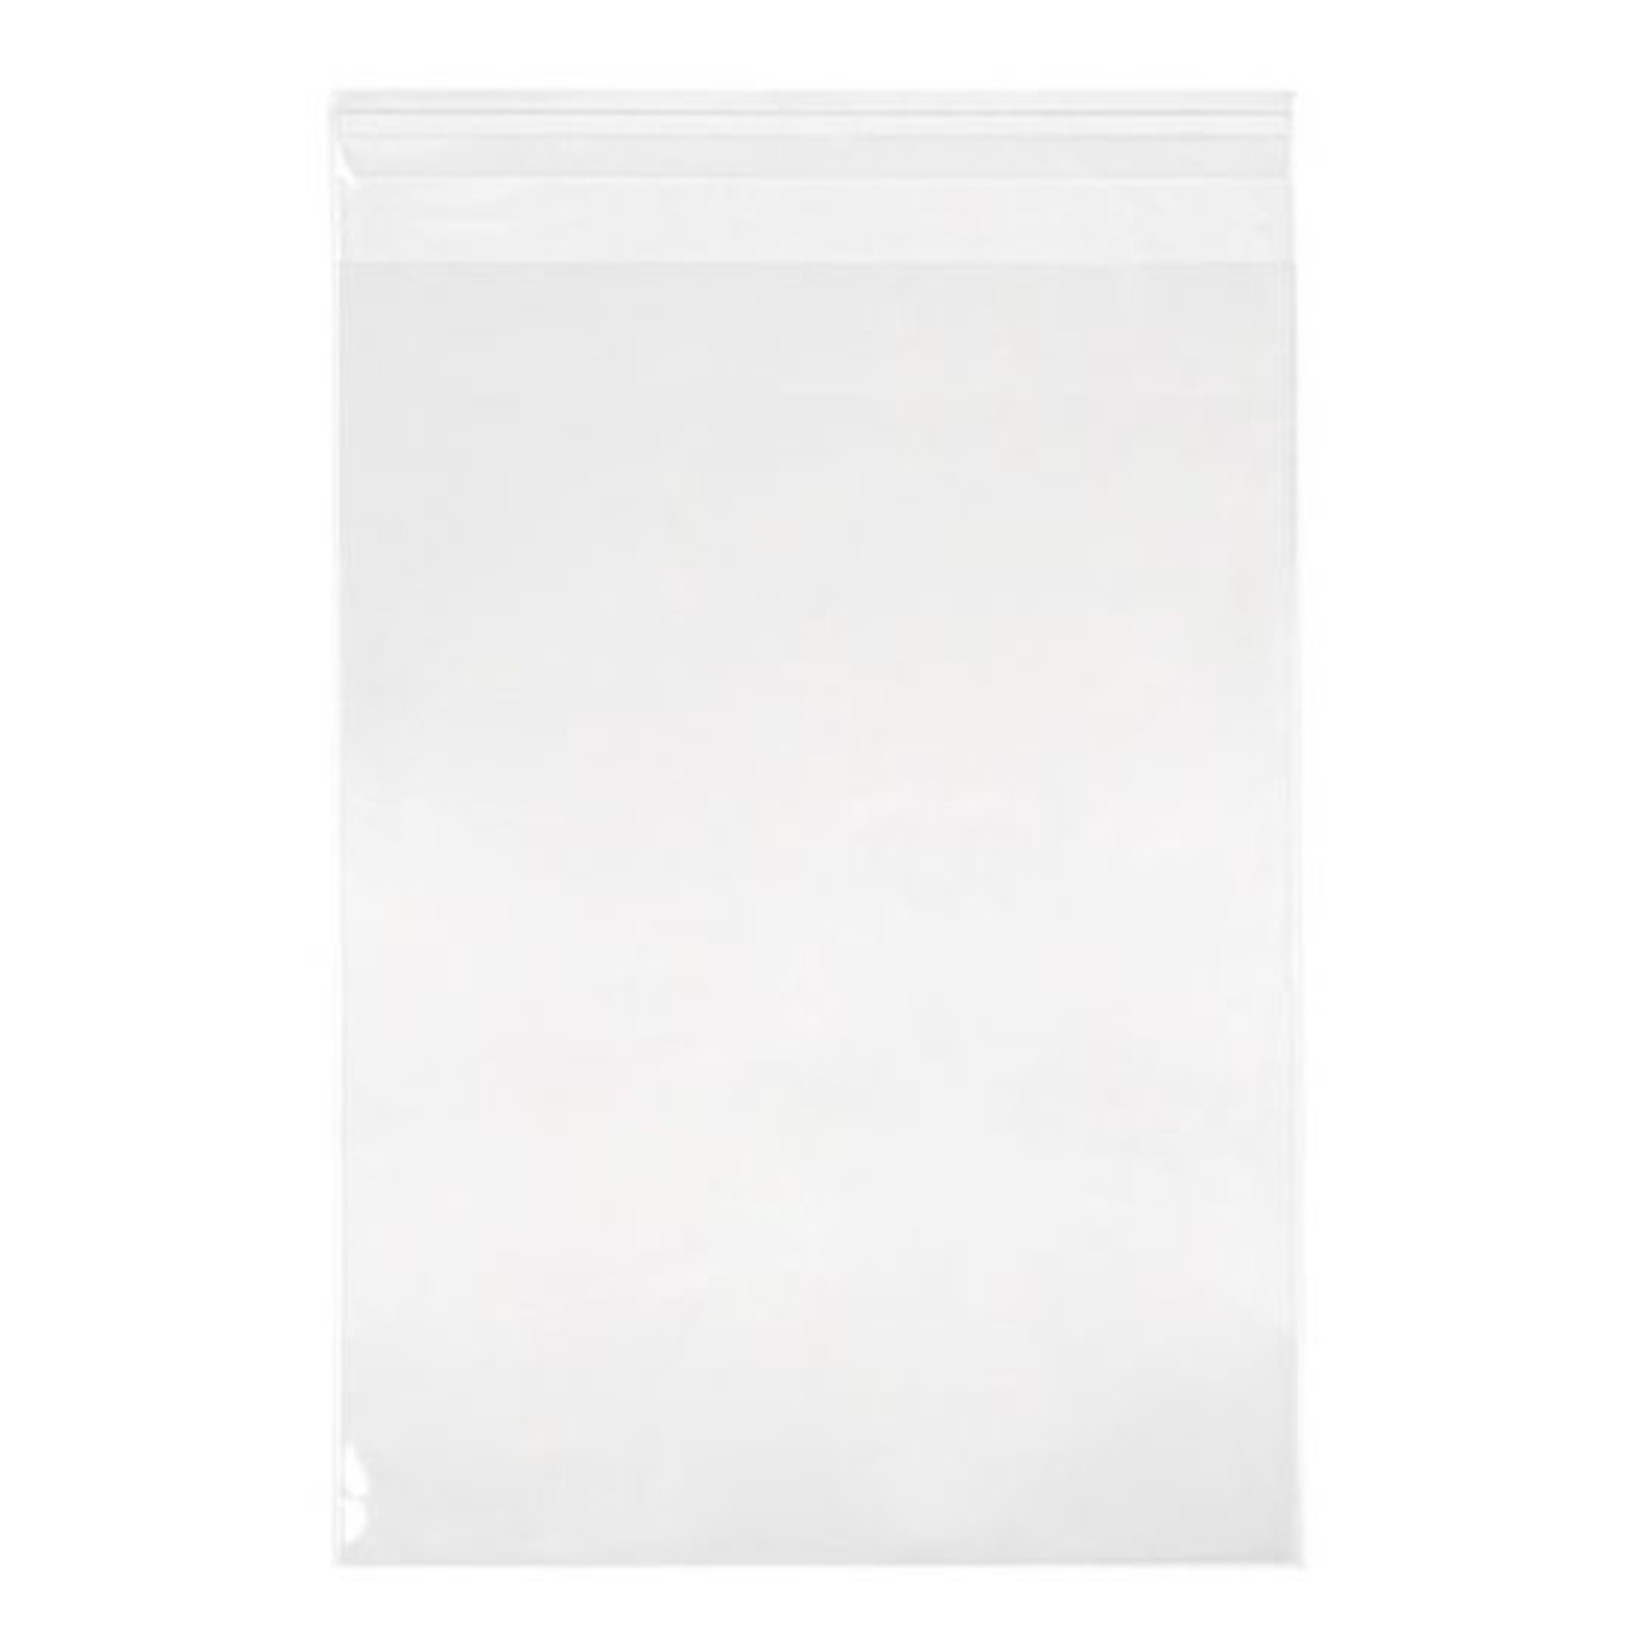 CLEARBAGS CLEAR BAG 8.5X11 EA